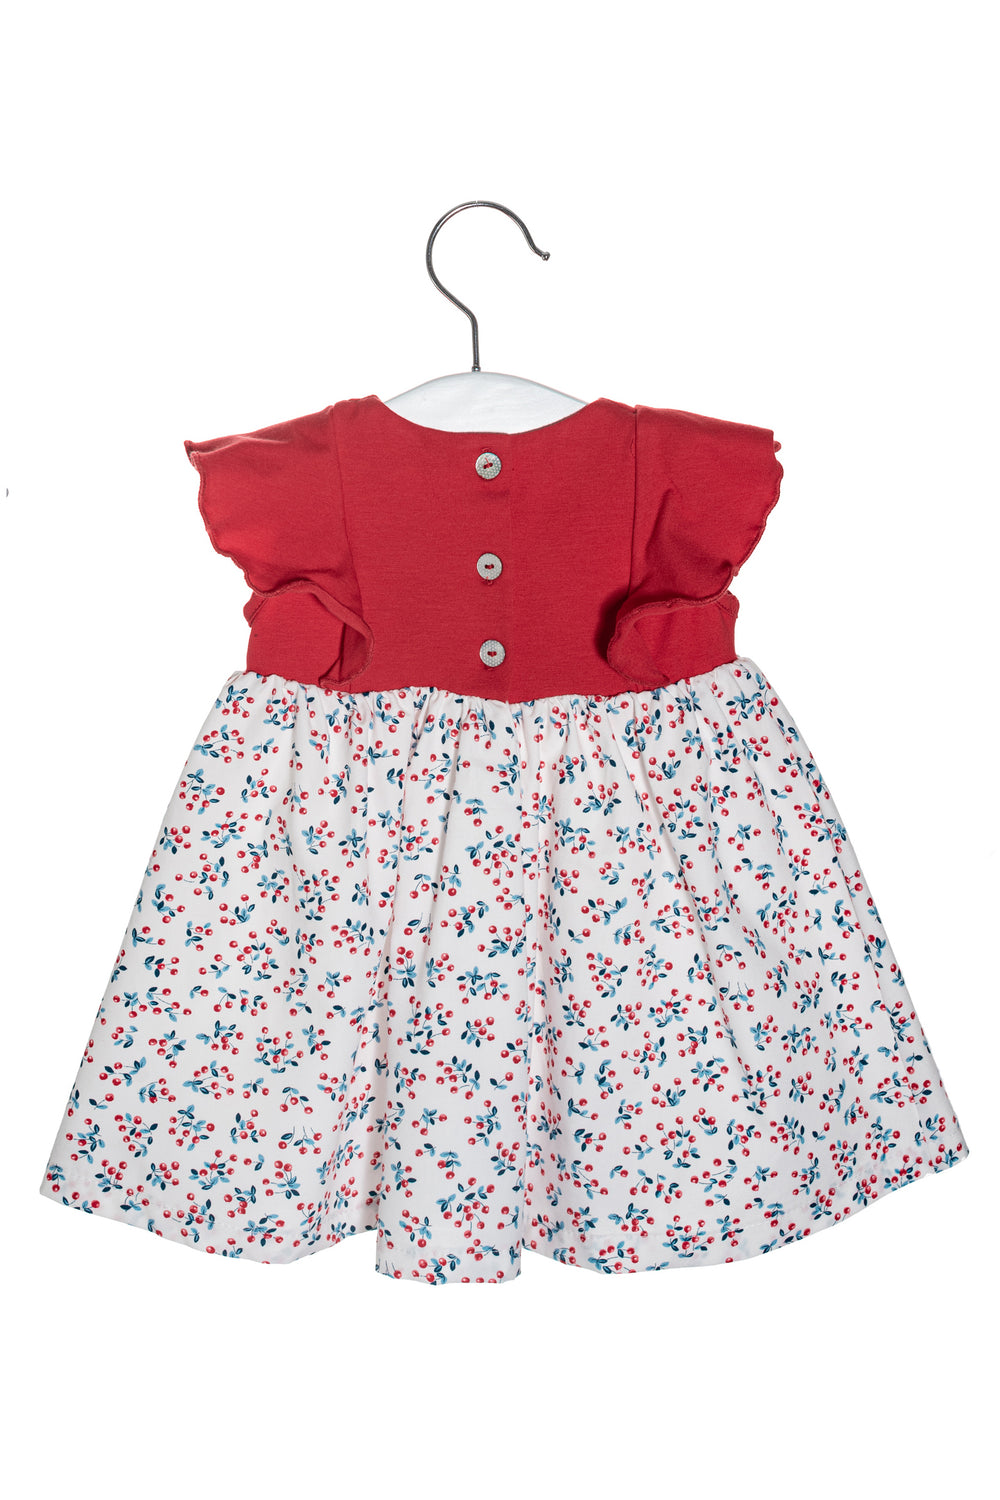 Coccodè "Cerelia" Red Cherry Print Dress | iphoneandroidapplications